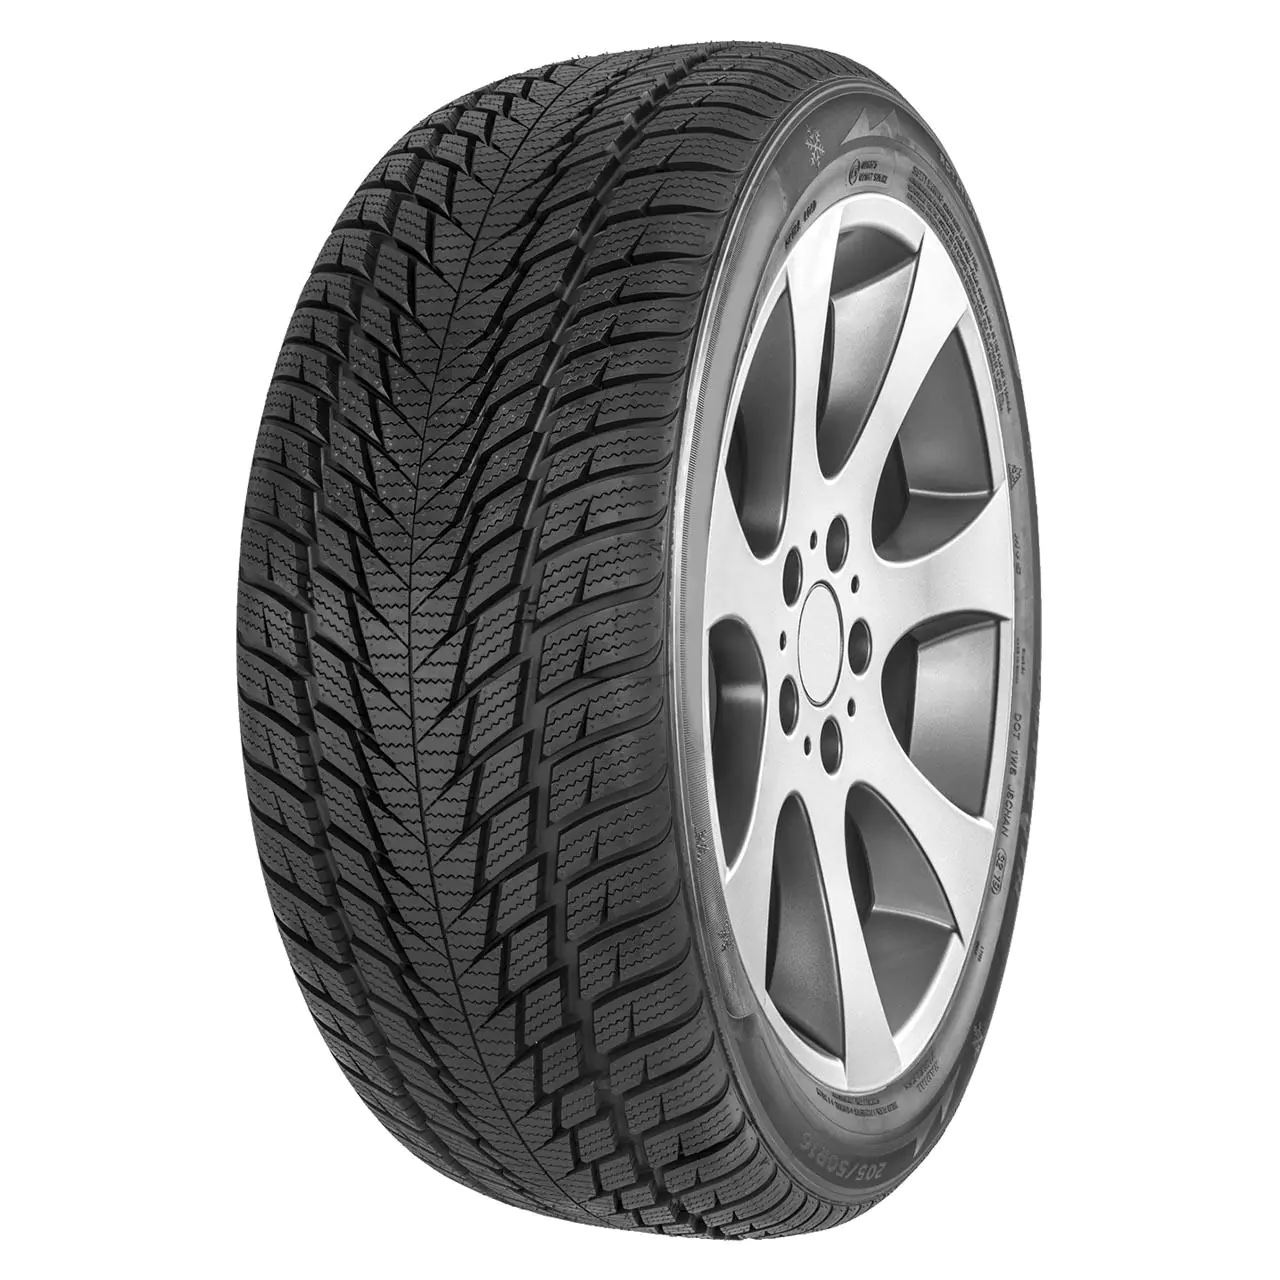 Gomme Autovettura Fortuna 235/45 R18 98V GOWIN UHP2 XL M+S Invernale